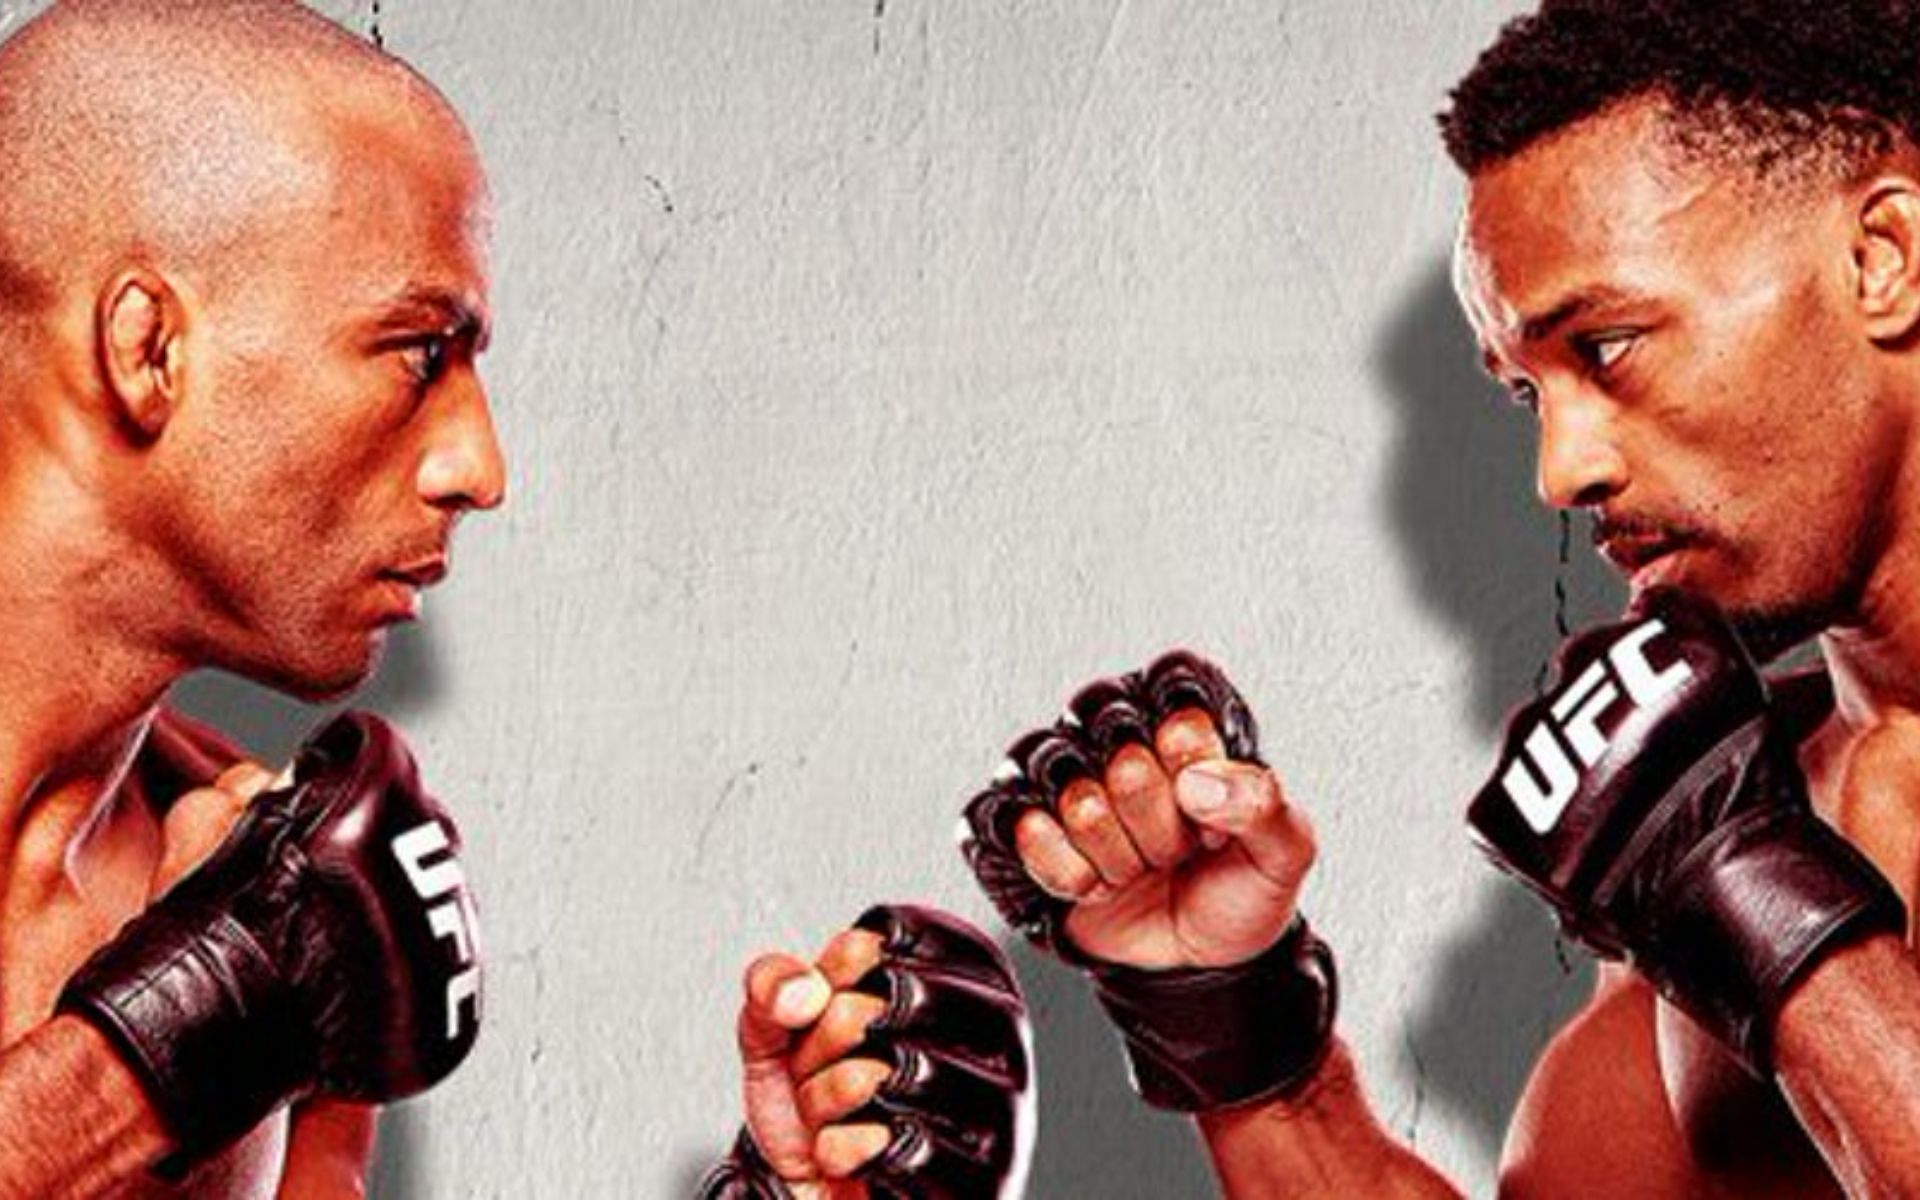 Edson Barboza (left) and Lerone Murphy (right) will fight at UFC Vegas 92 [Image credits: @ufc on X]